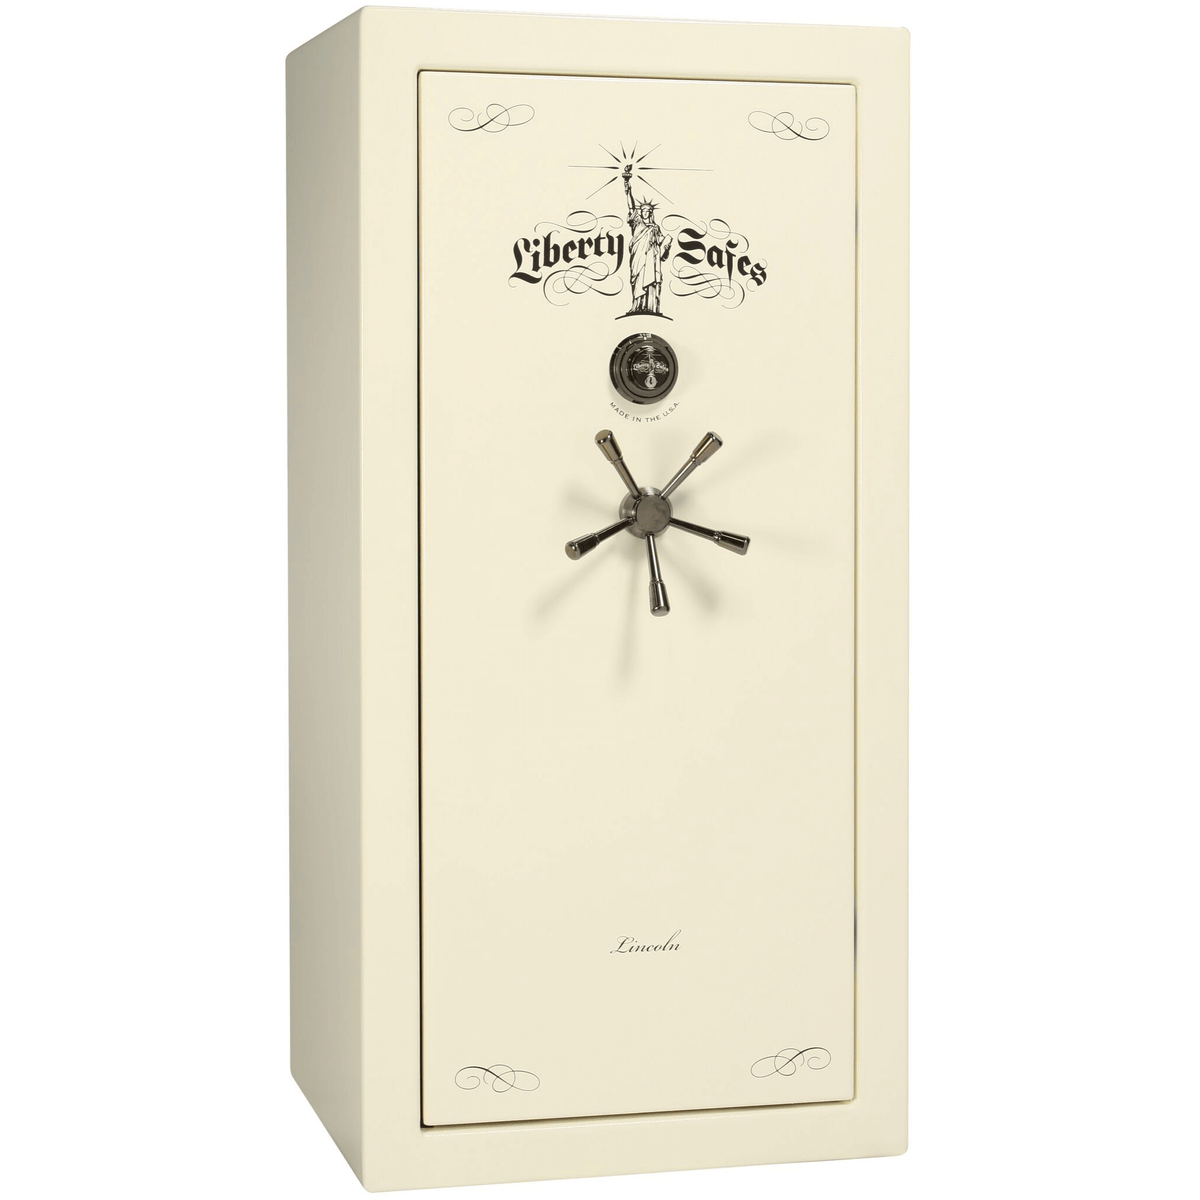 Liberty Lincoln 25 Safe in White Marble with Black Chrome Mechanical Lock.